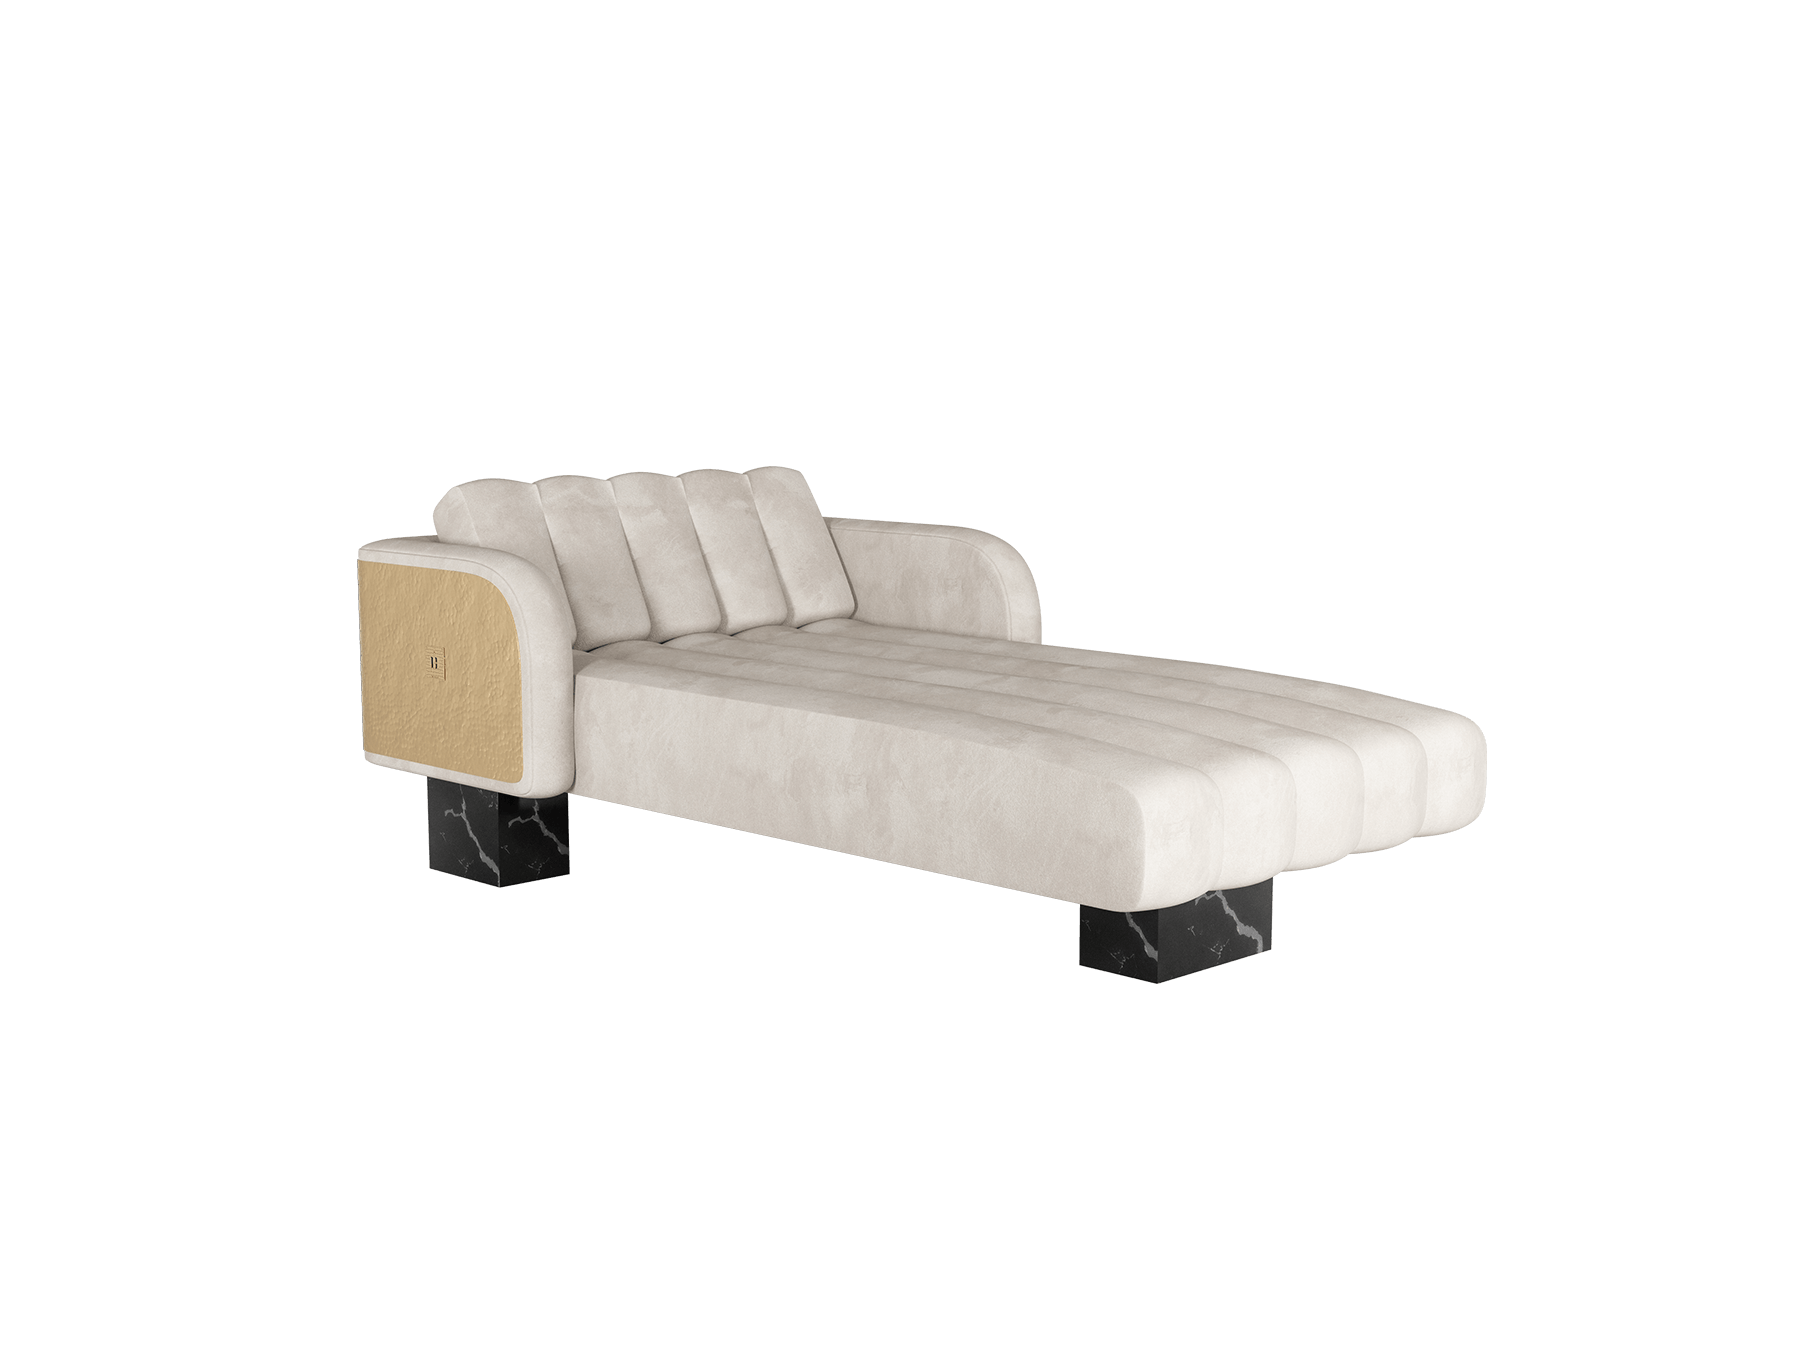 luxury chaise longue for contemporary garden designs